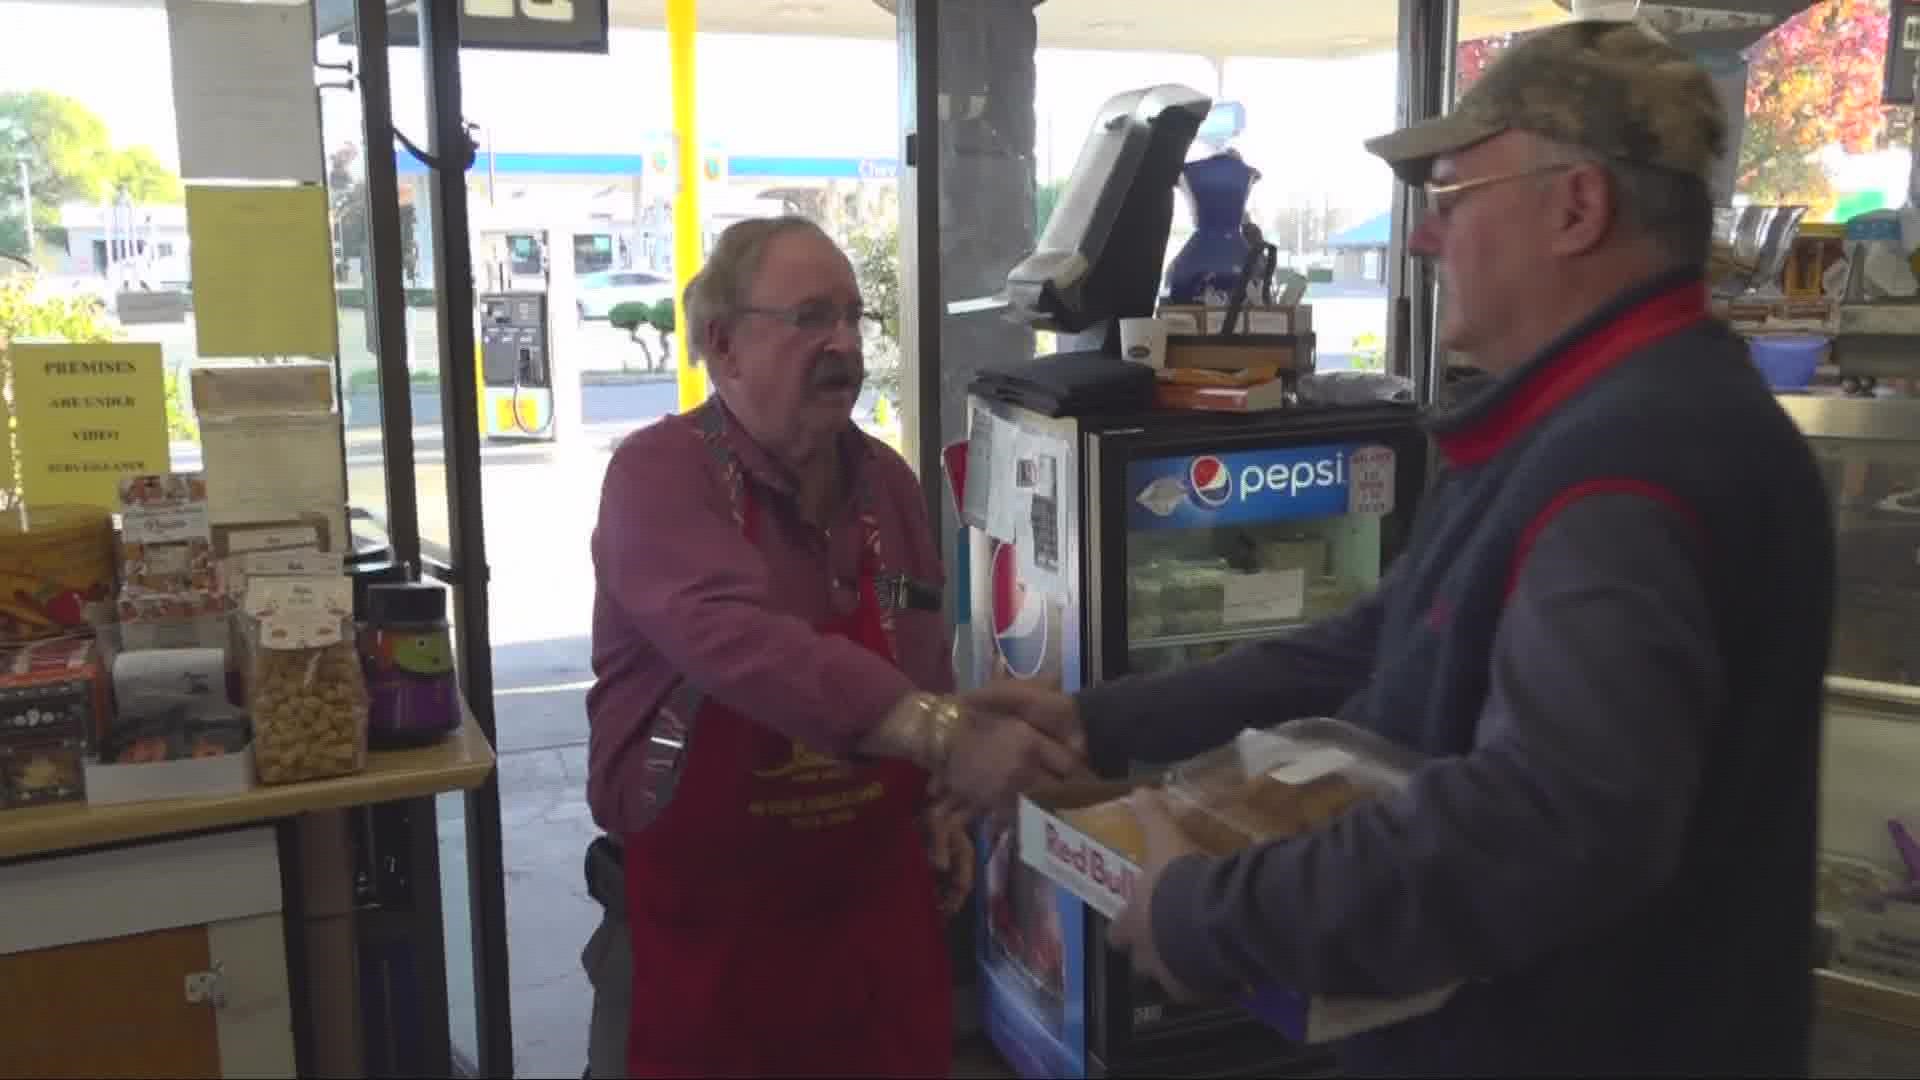 Ernie's General Store owner Ernest Giannecchini said his store known for lucky Lottery winners will be helping his customers with gas prices this Thanksgiving.